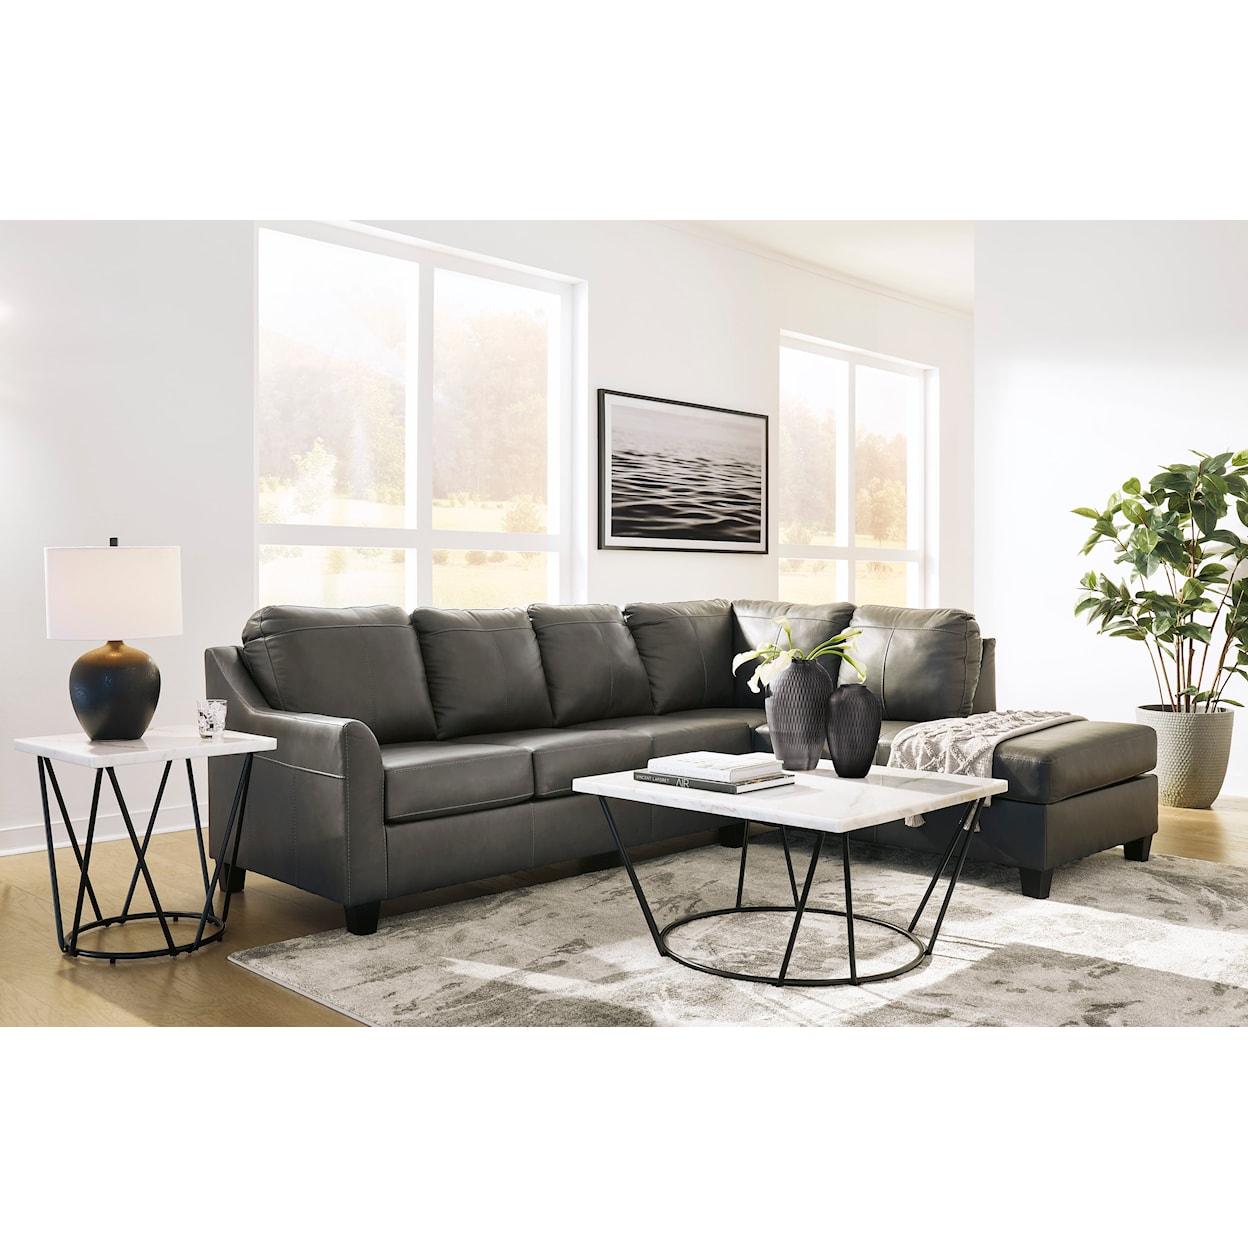 Ashley Furniture Signature Design Valderno 2-Piece Sectional with Chaise